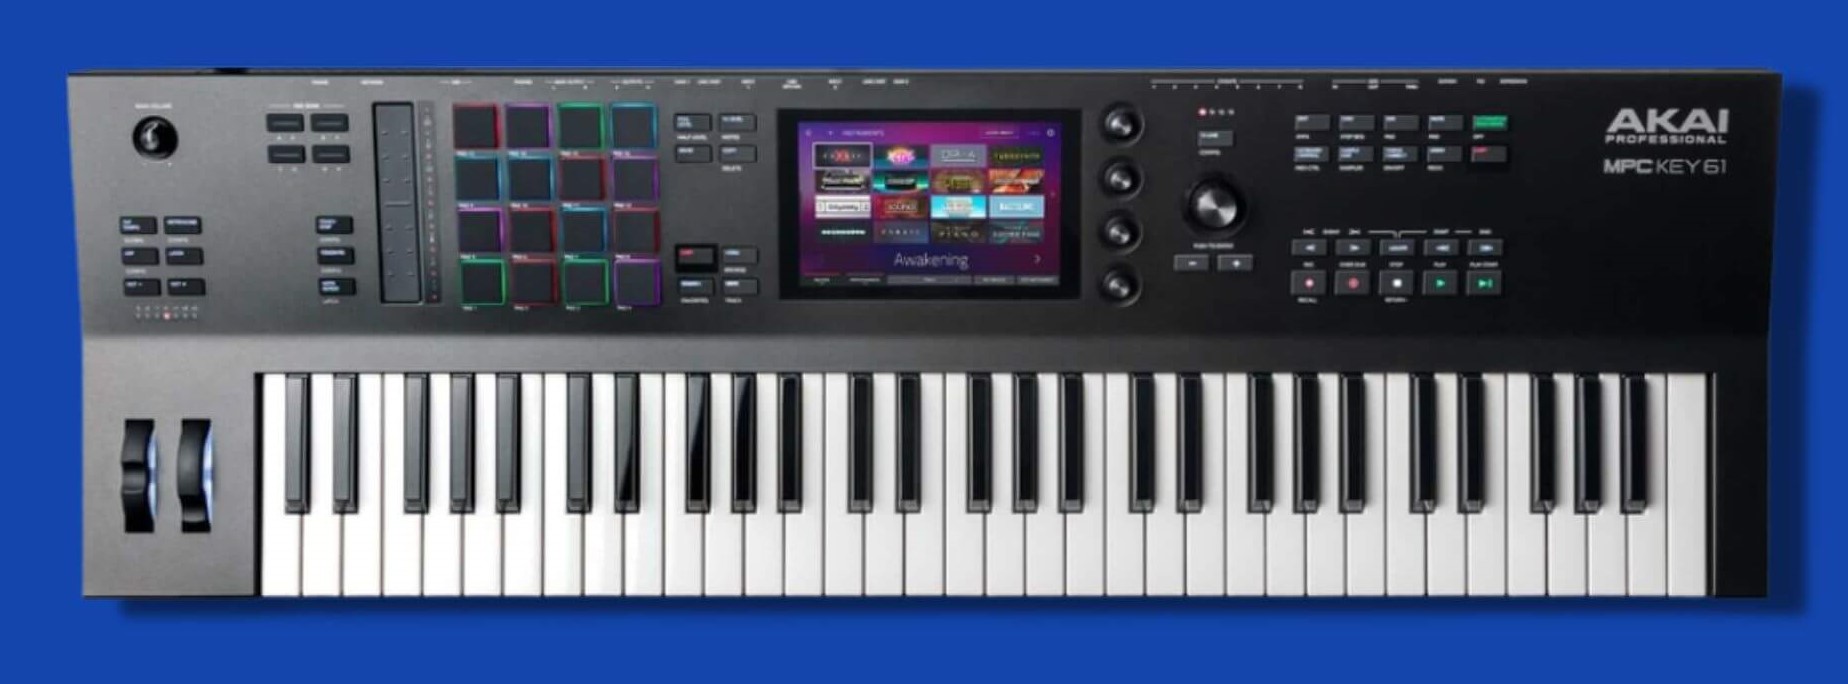 The interface of the AKAI MPC 61 Key is neatly laid out for ease of use. It